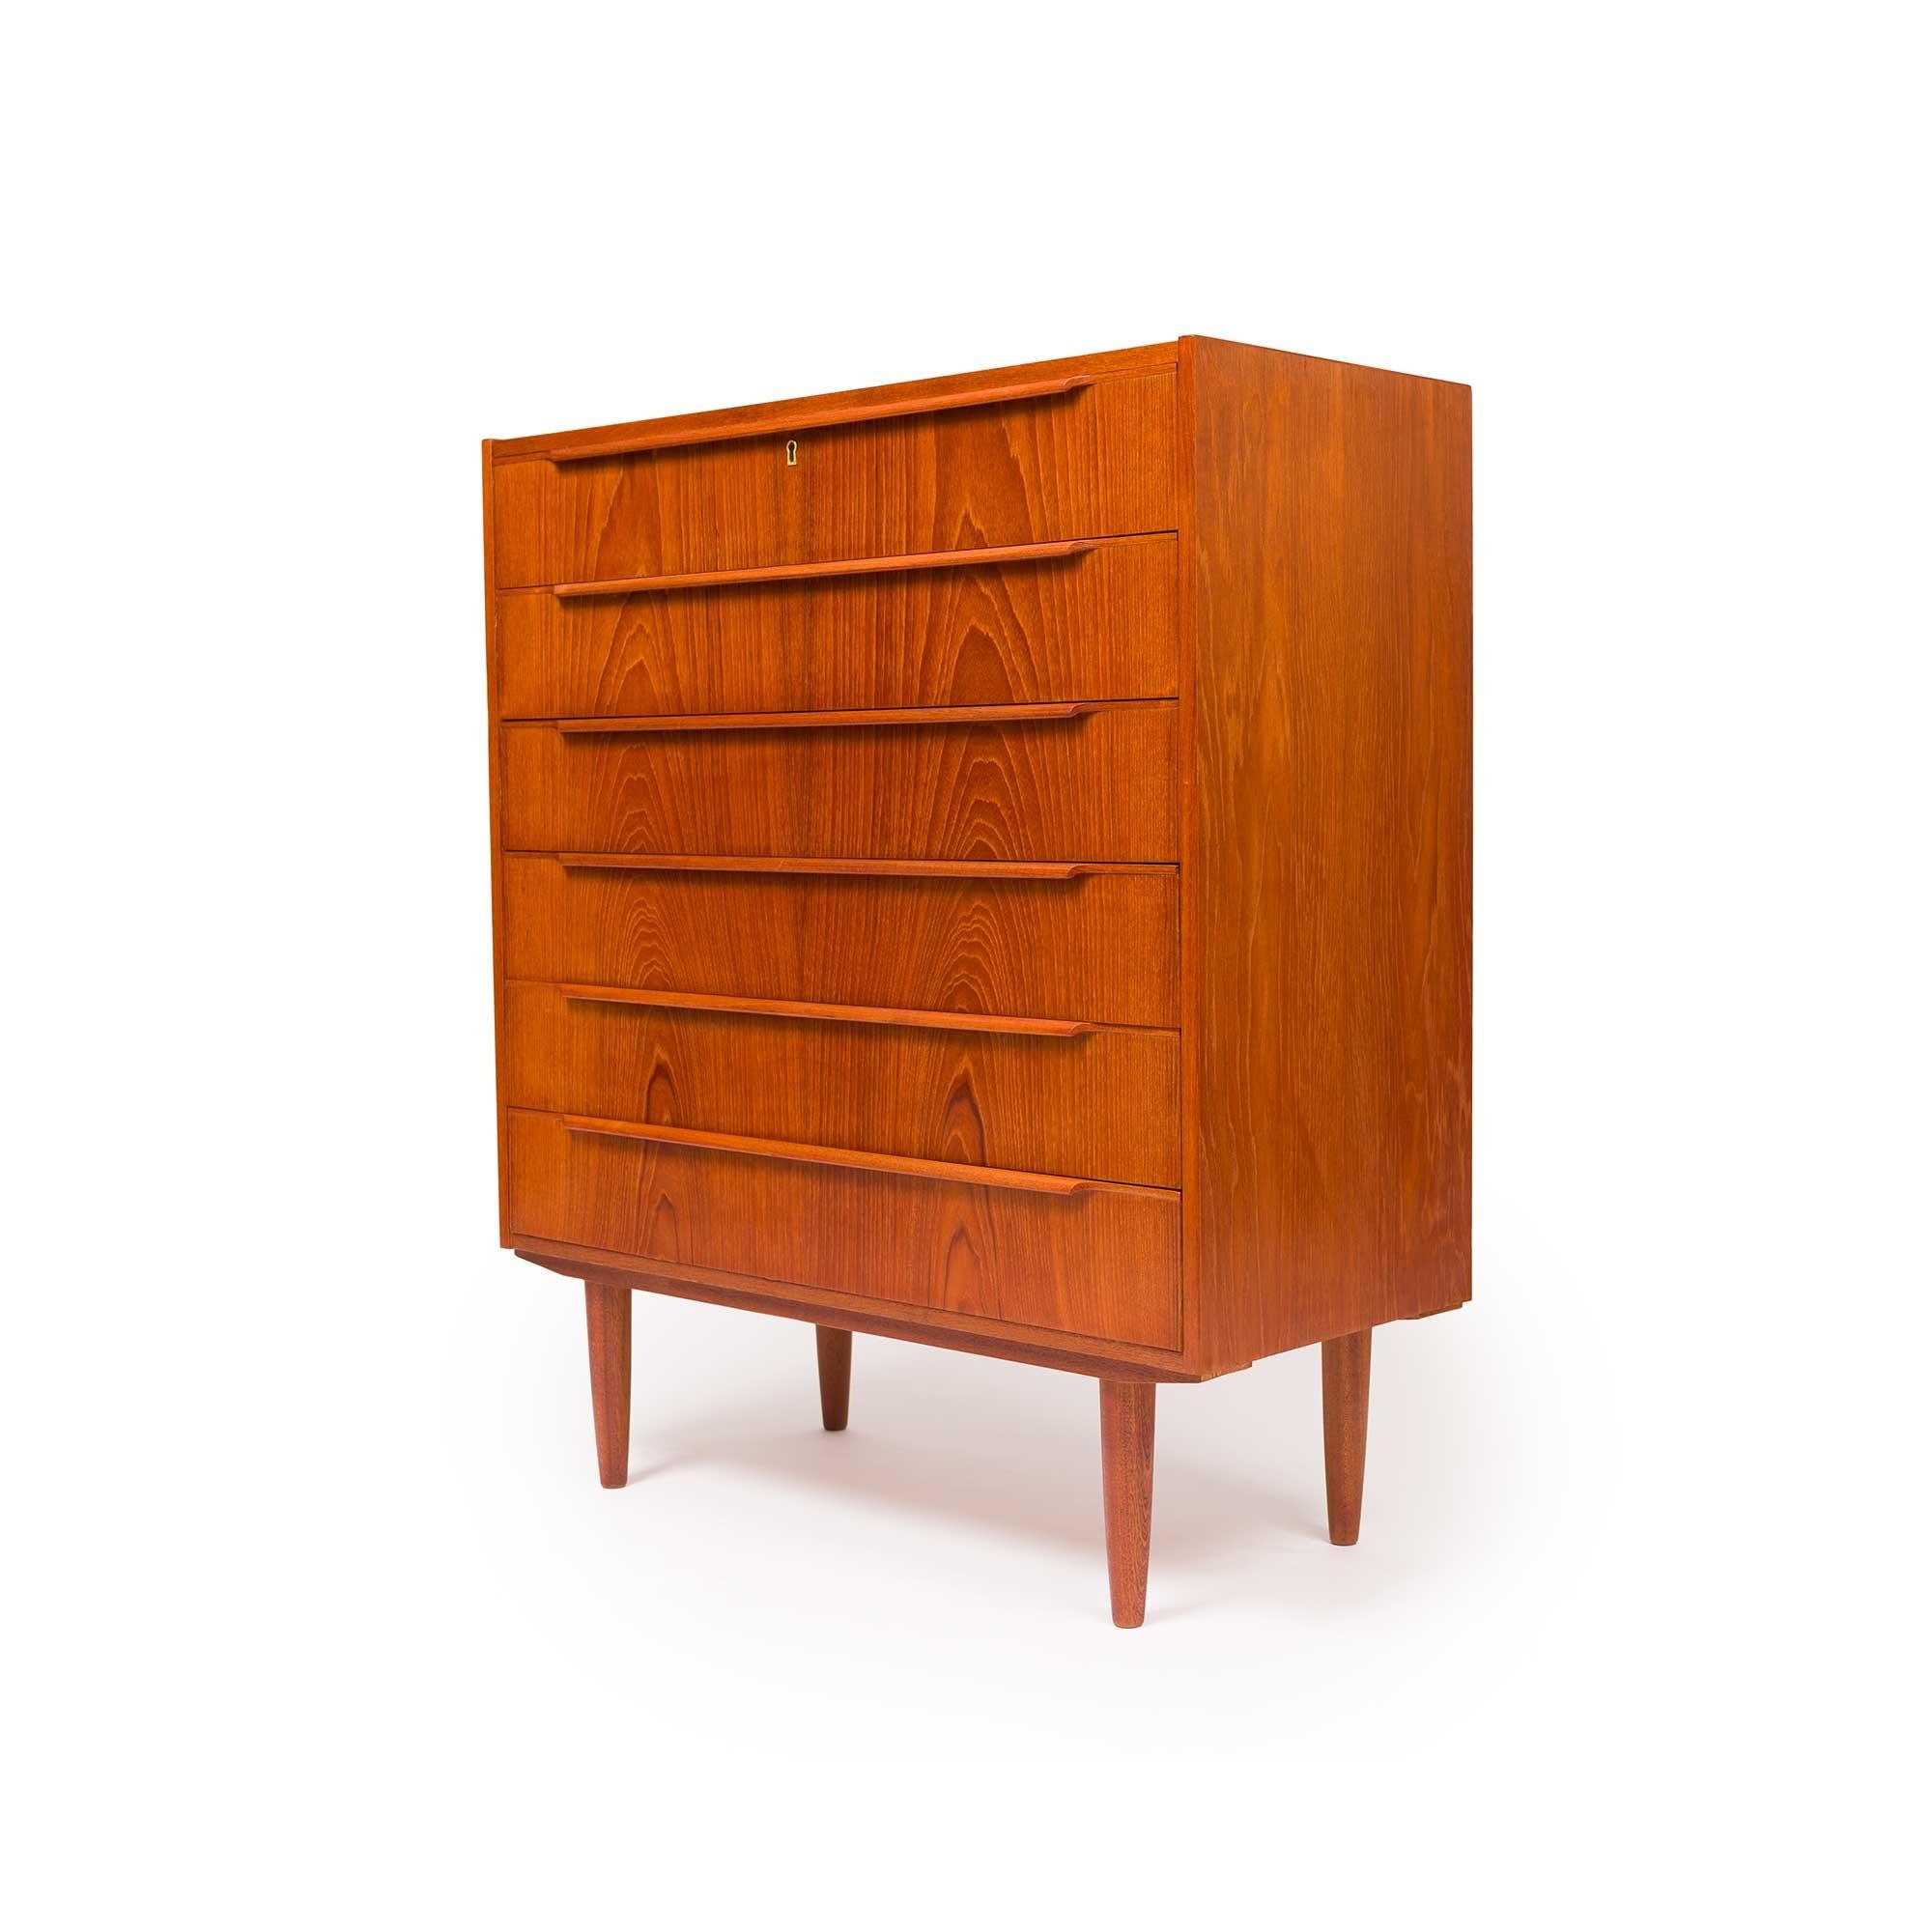 This mid-century modern Danish tallboy chest of drawers embodies the essence of Mid-Century design. Its six drawers, adorned with sculptured wooden handles and seamless dovetail joins, effortlessly combine functionality with elegance. The natural